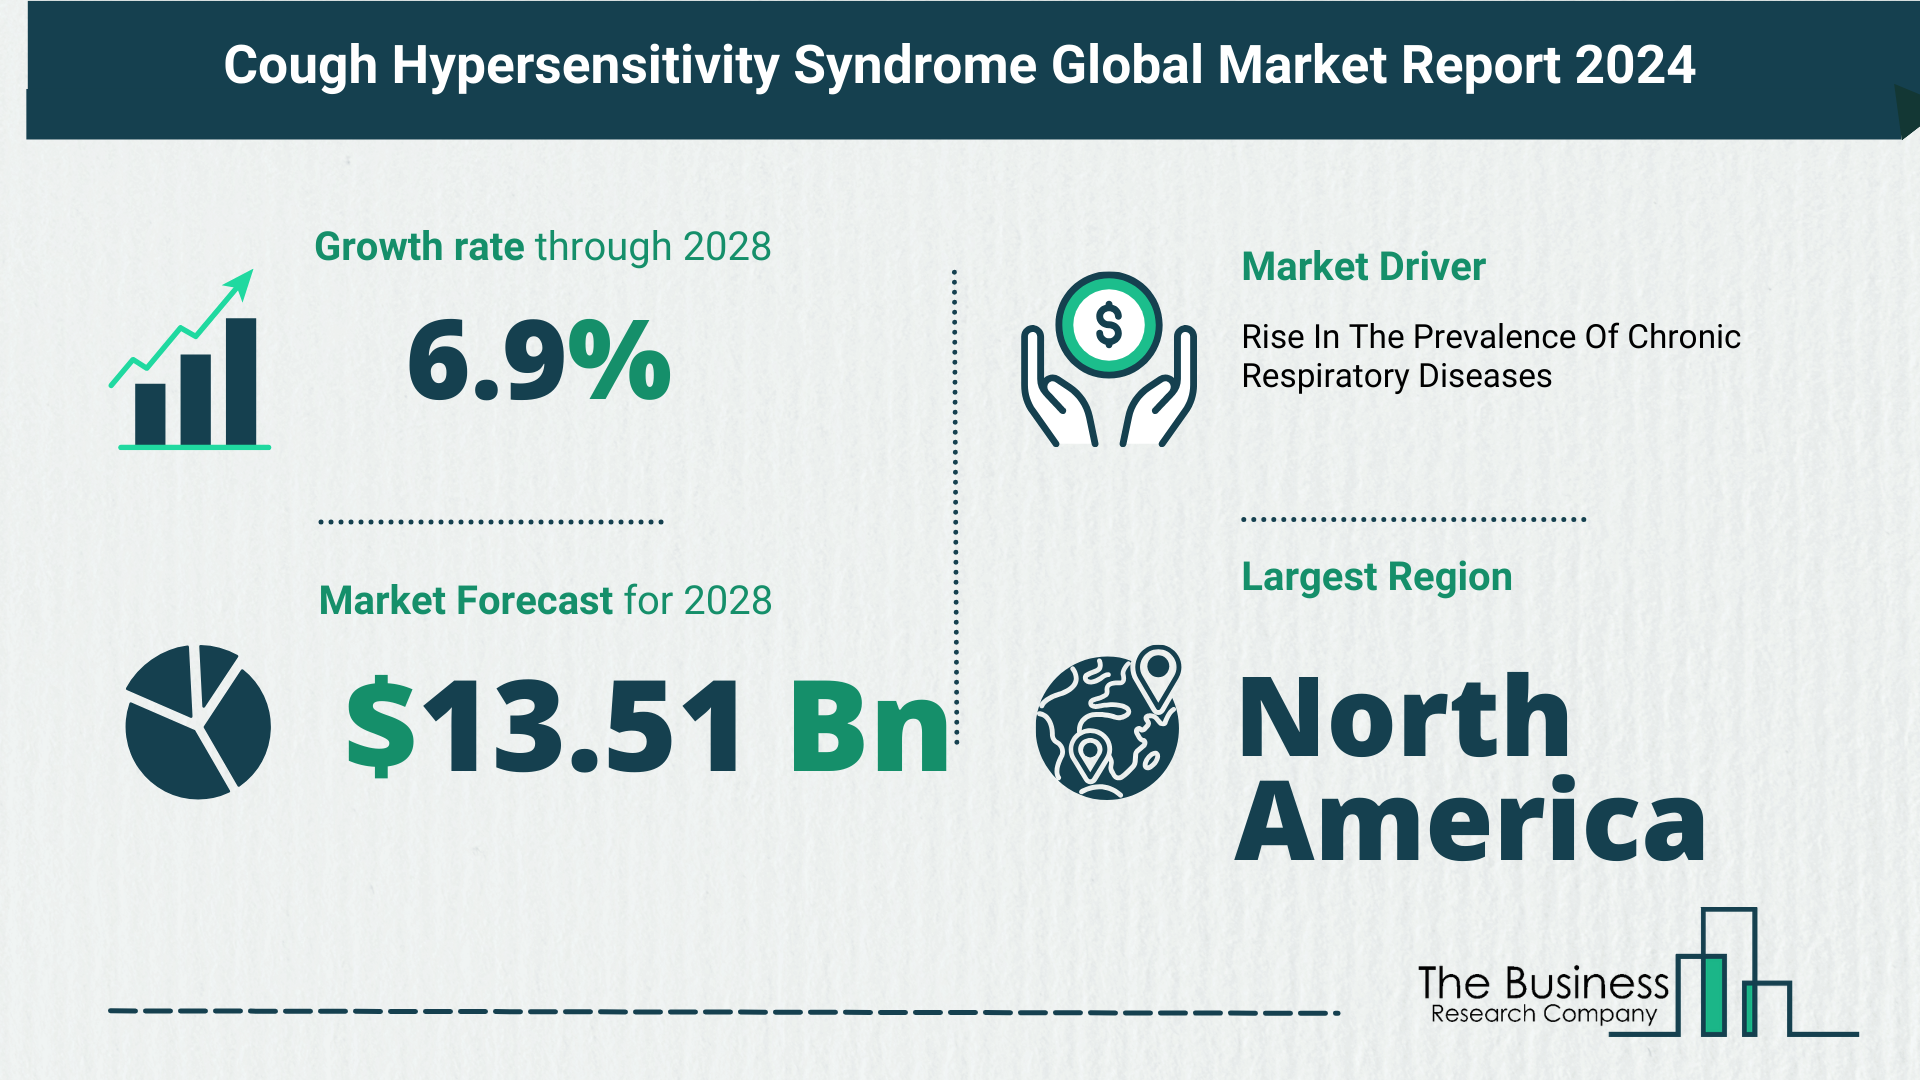 What Is The Forecast Growth Rate For The Cough Hypersensitivity Syndrome Market?